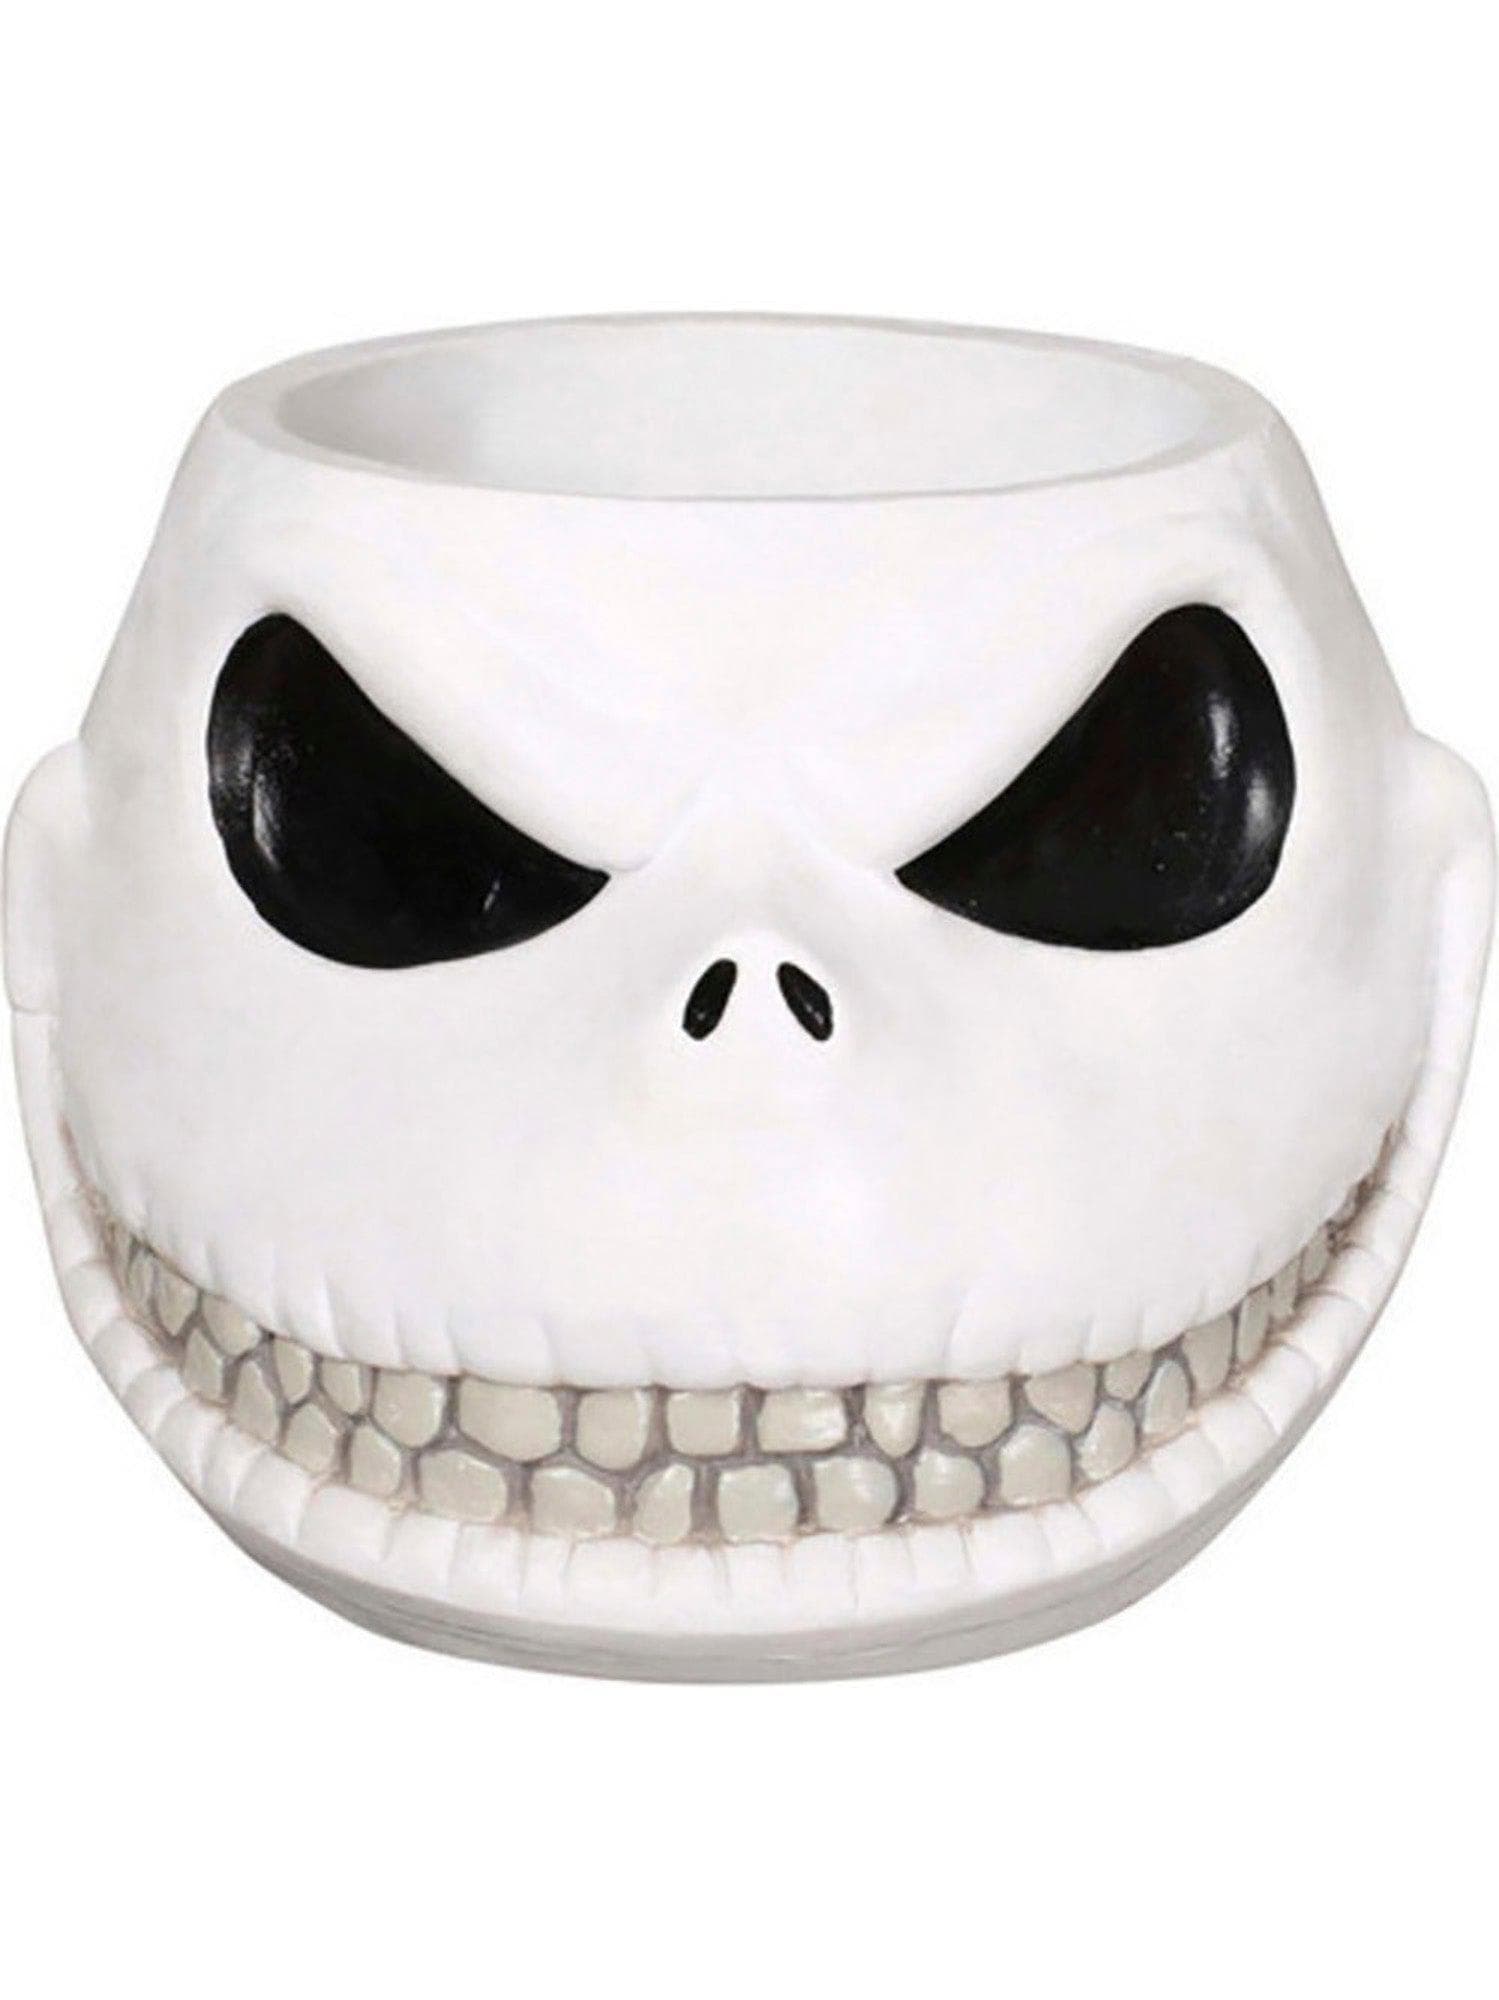 8 Inch The Nightmare Before Christmas Jack Skellington Candy Bowl - costumes.com